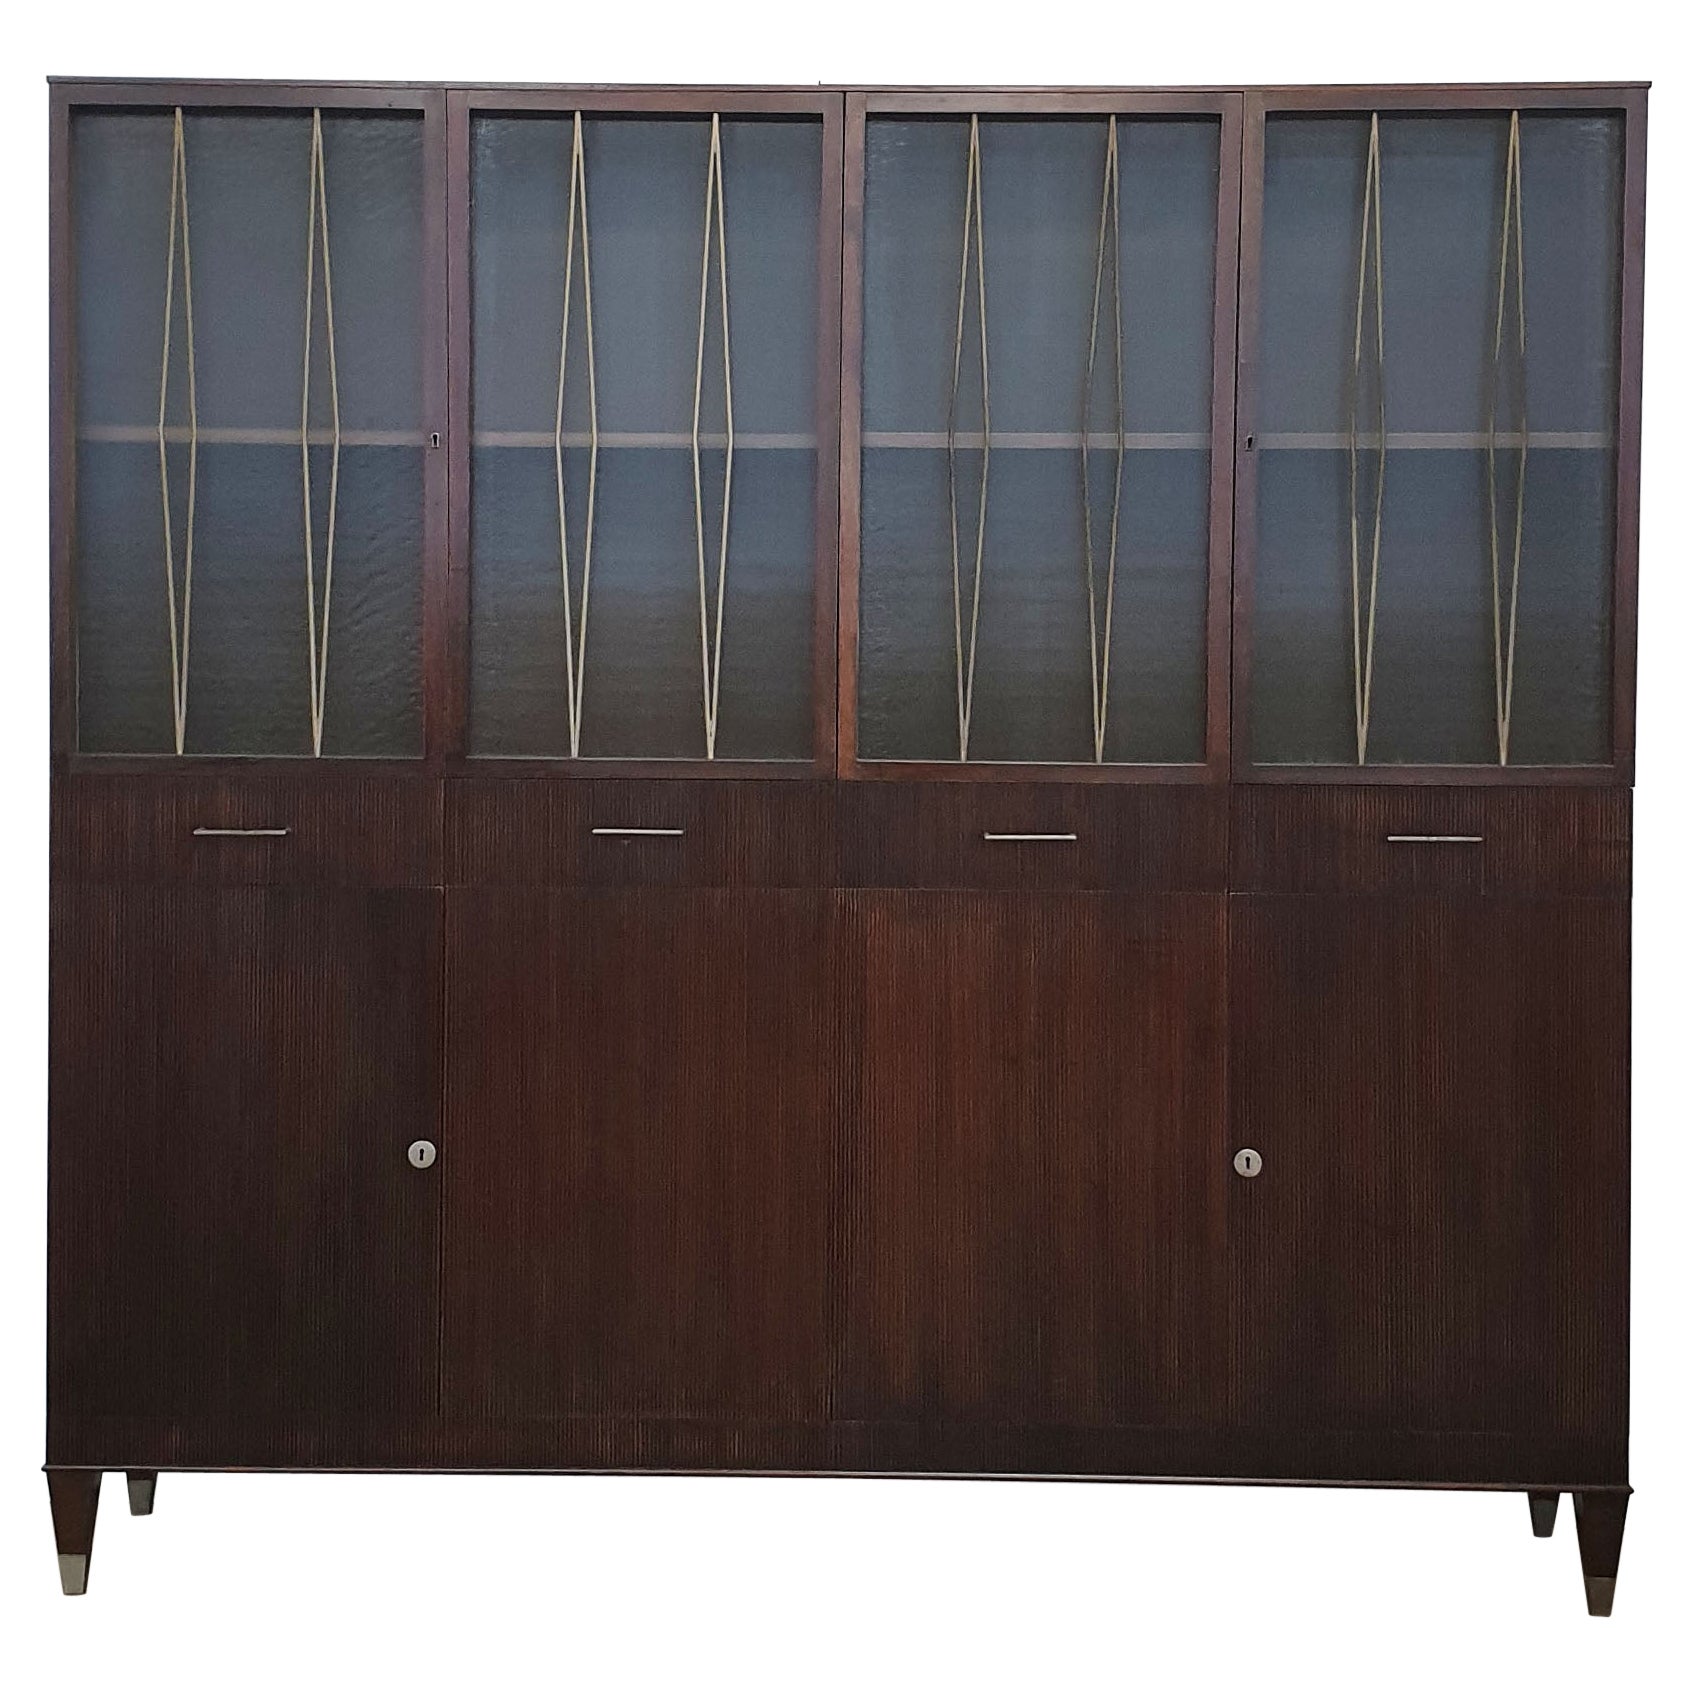 Architects Asnago & Vender Italian Rationalist Cabinet, Italy 1940s For Sale